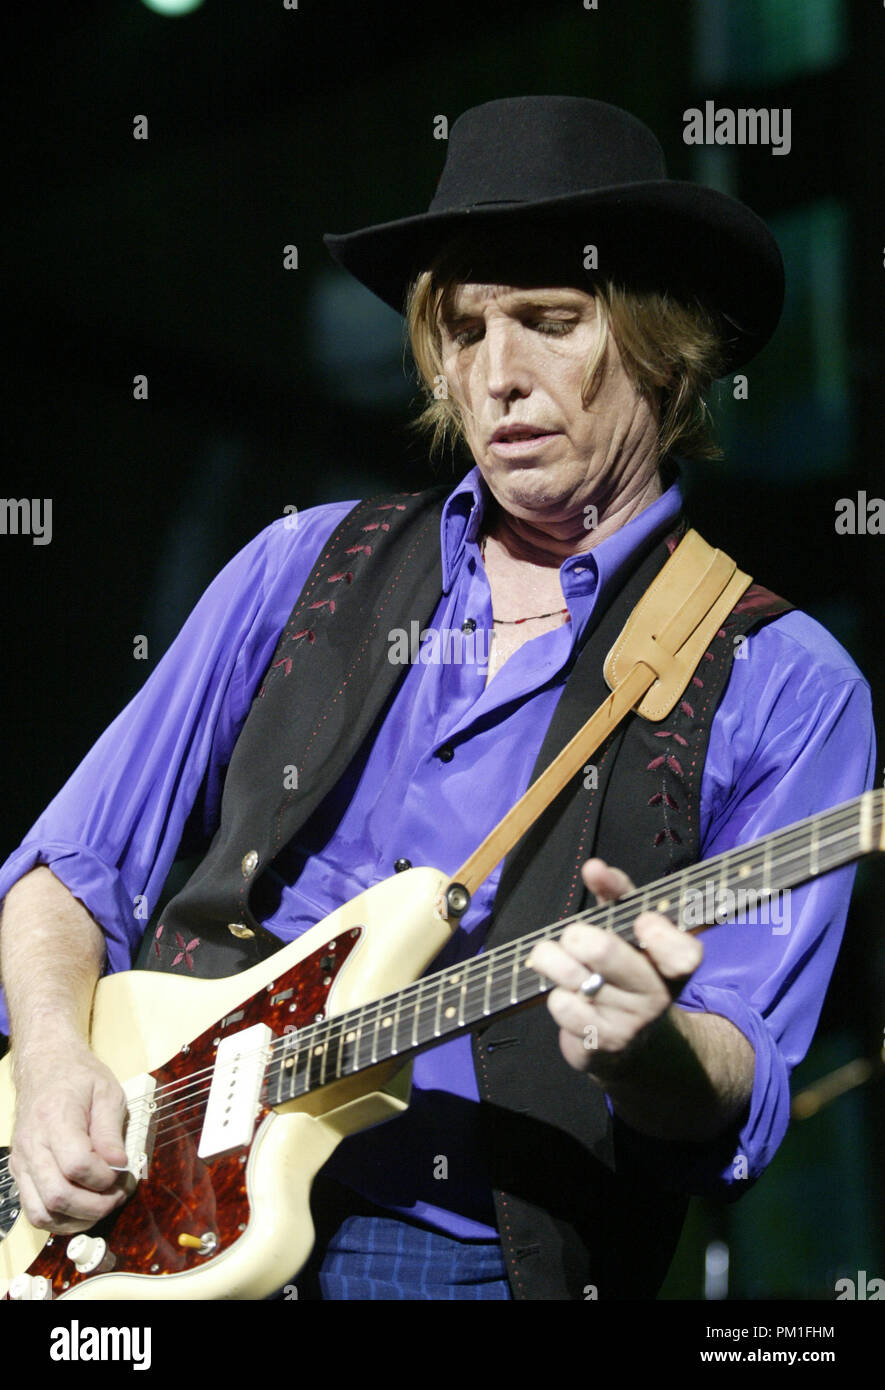 Tom Petty performs in concert at the Sound Advice Amphitheatre in West Palm Beach, Florida on June 8, 2005. Stock Photo